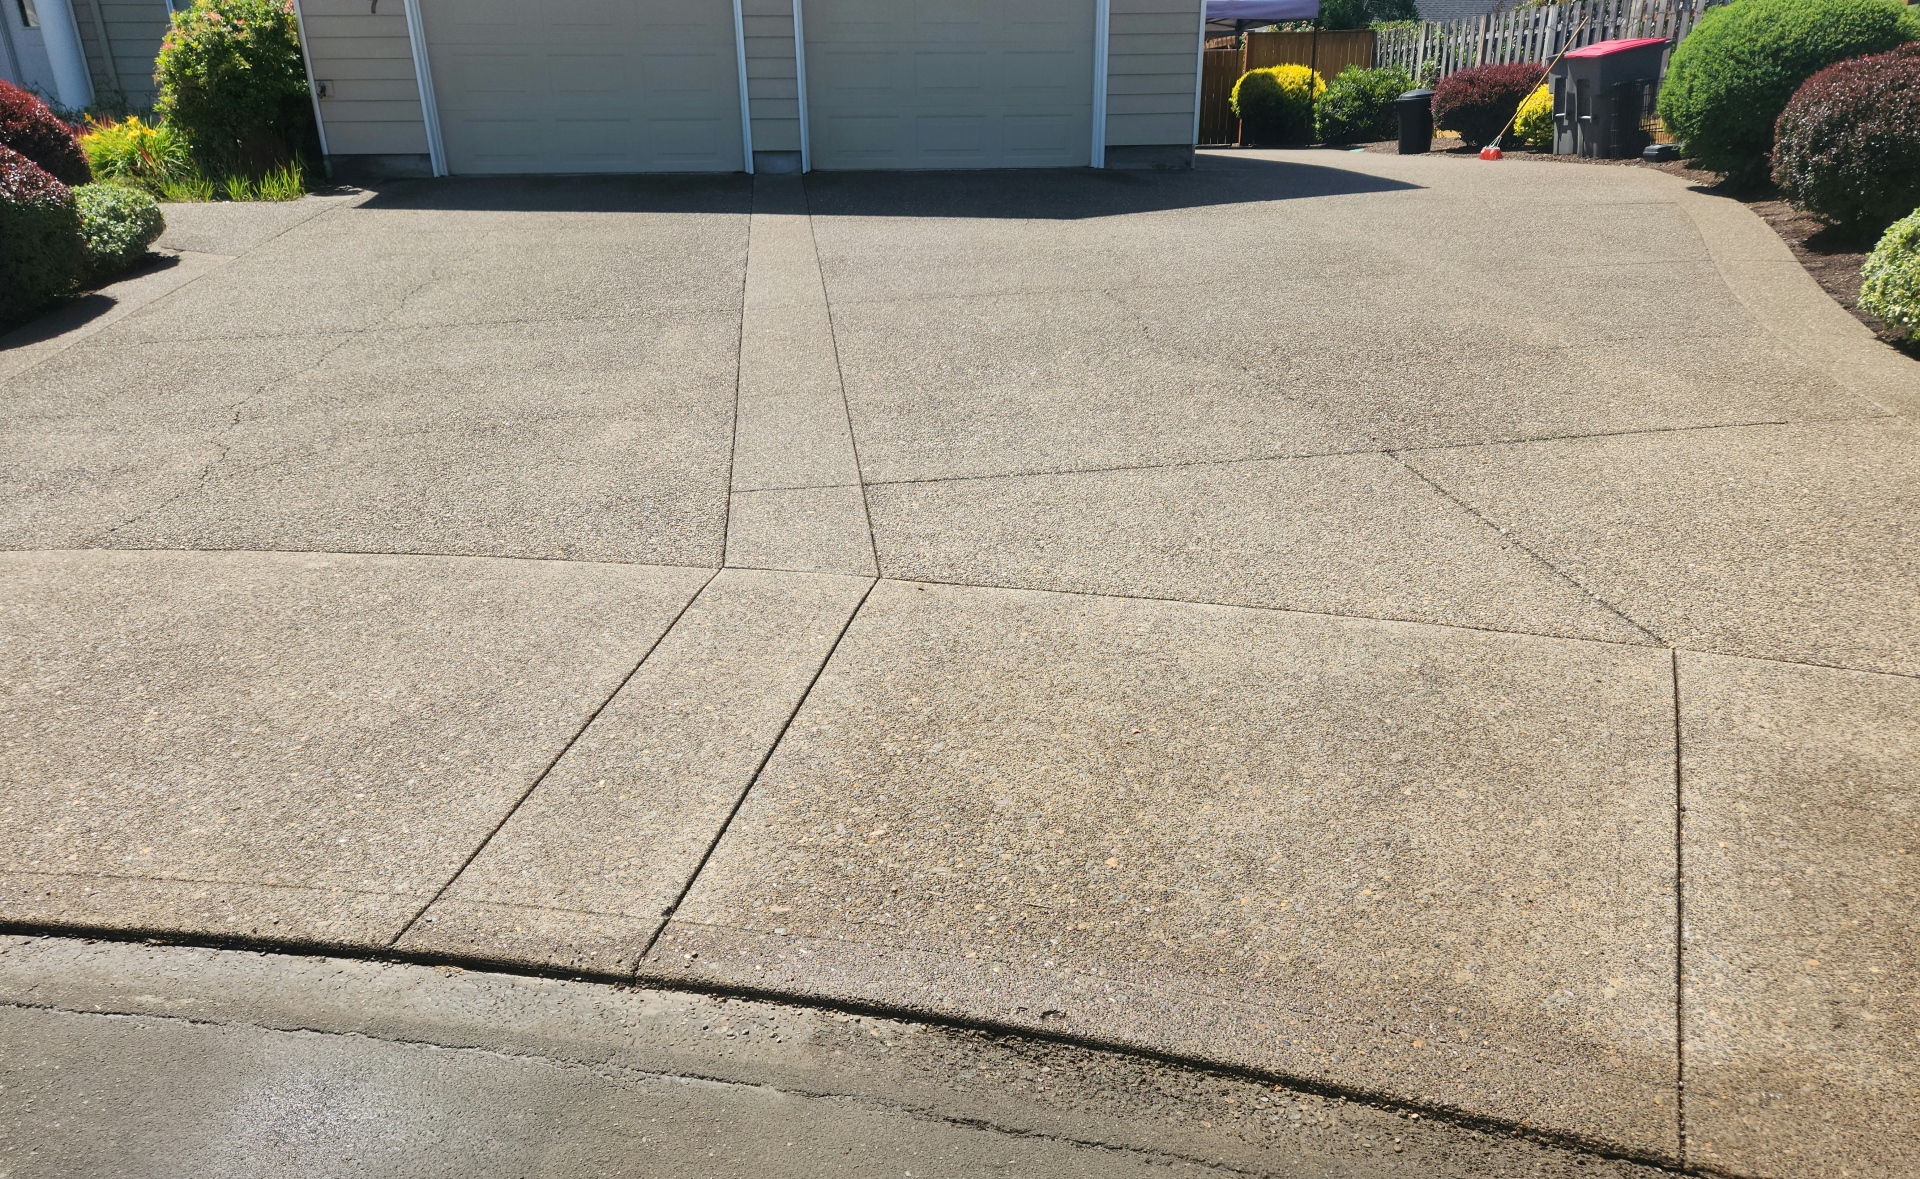 Flawless pressure washing driveway cleaning